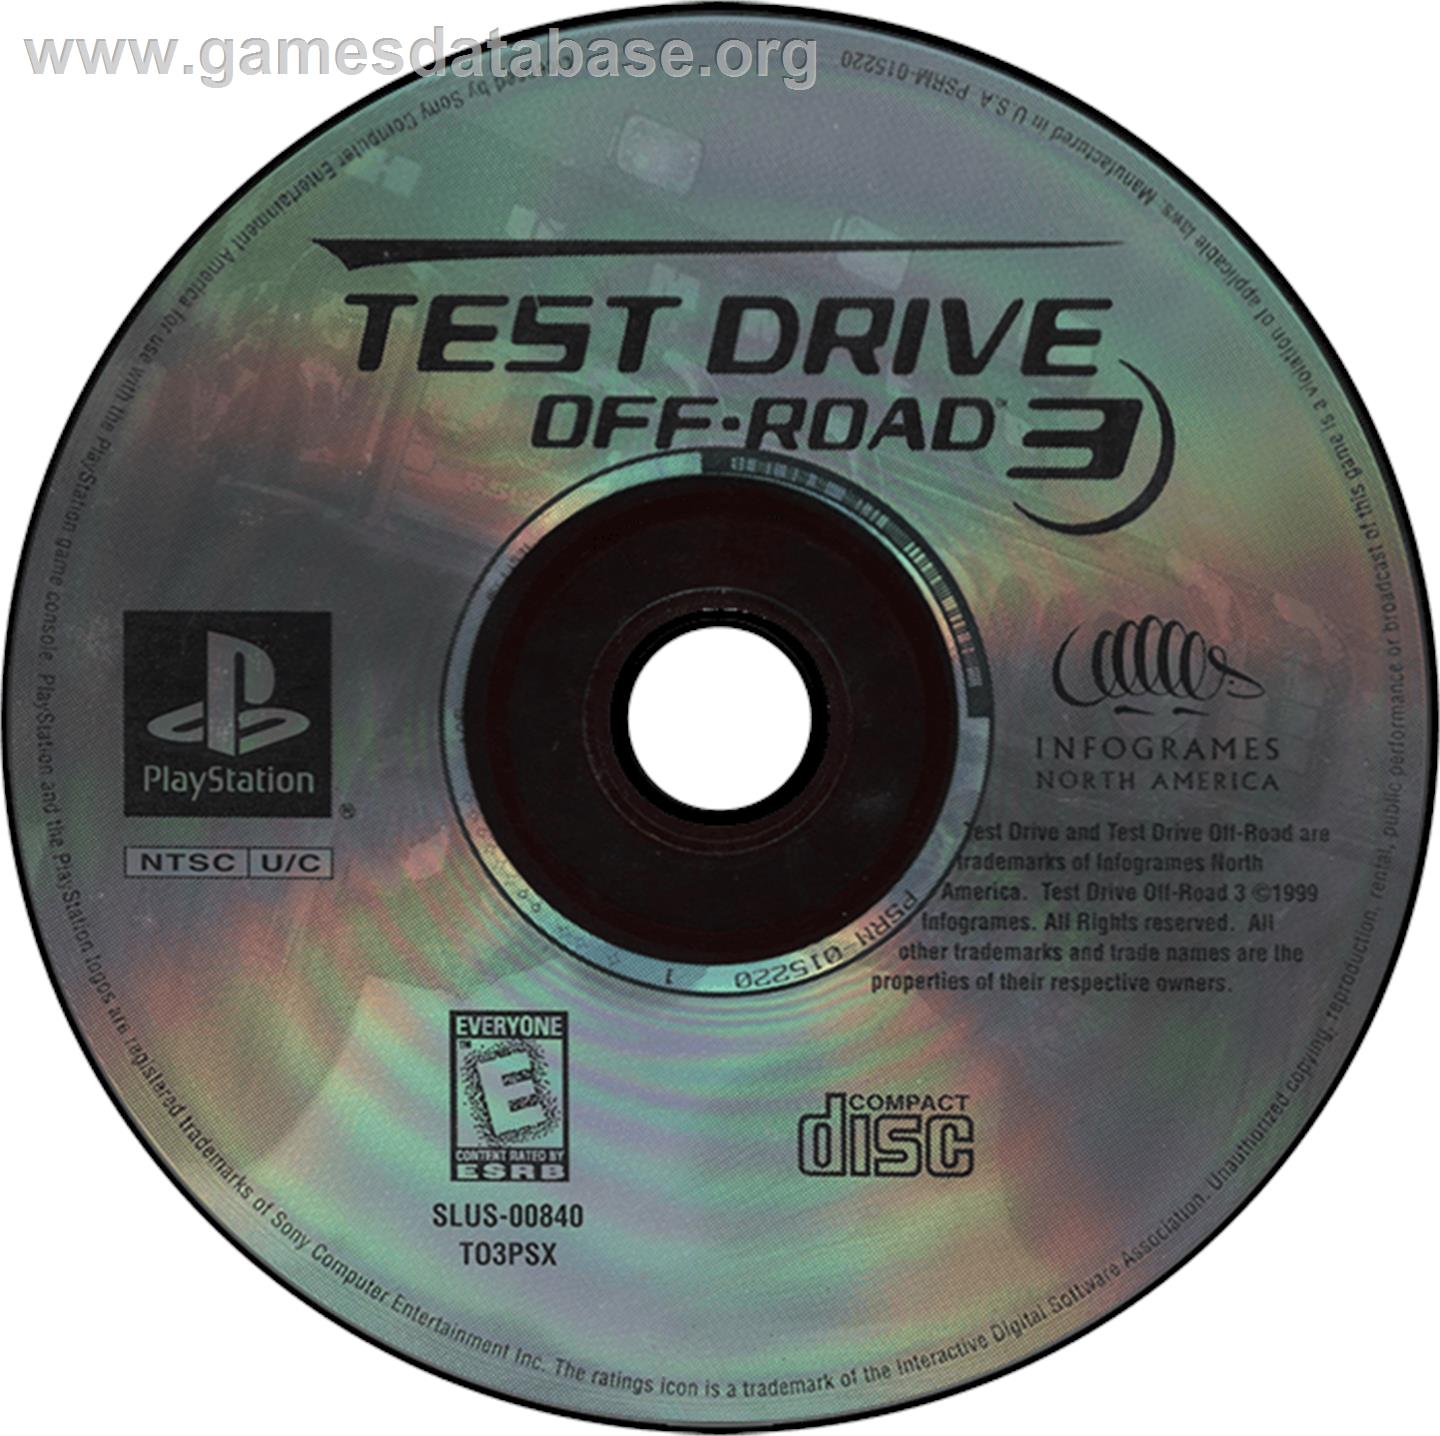 Test Drive: Off-Road 3 - Sony Playstation - Artwork - Disc